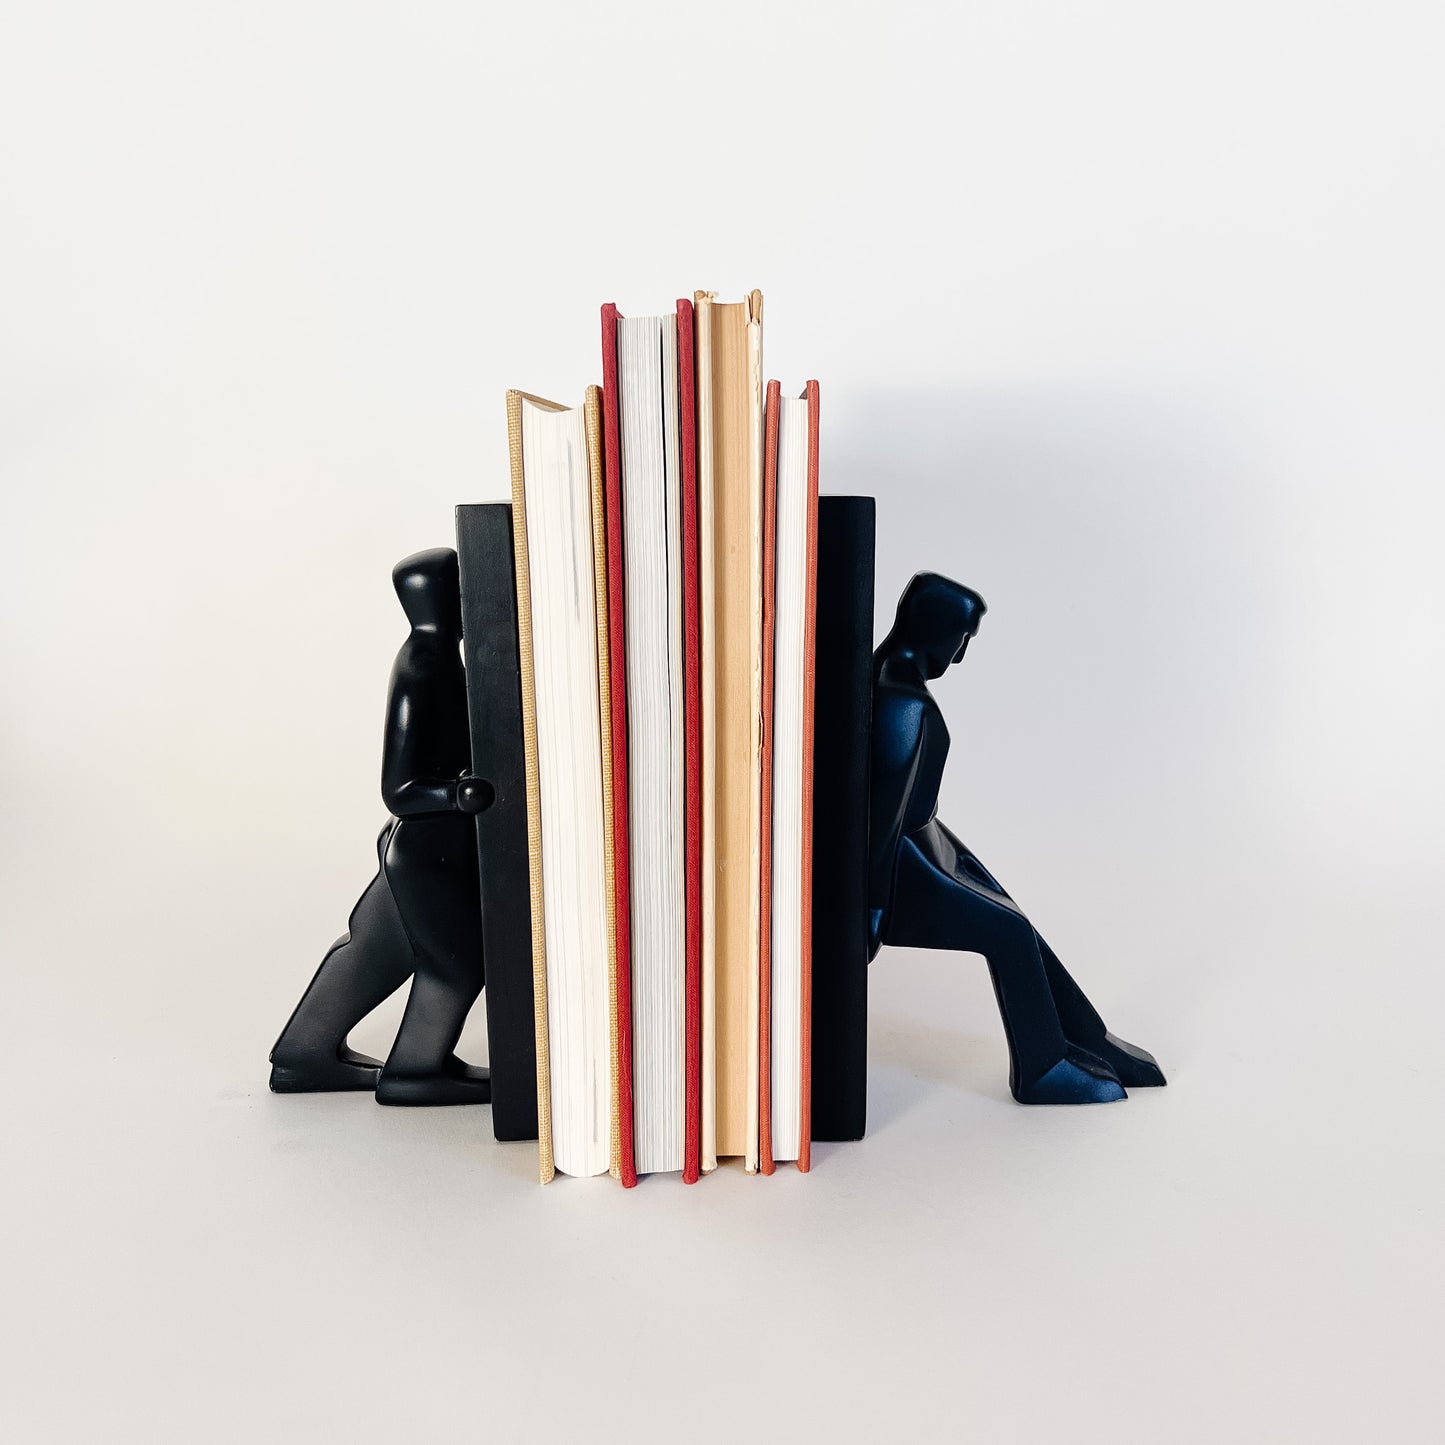 Chris Collicott bookends